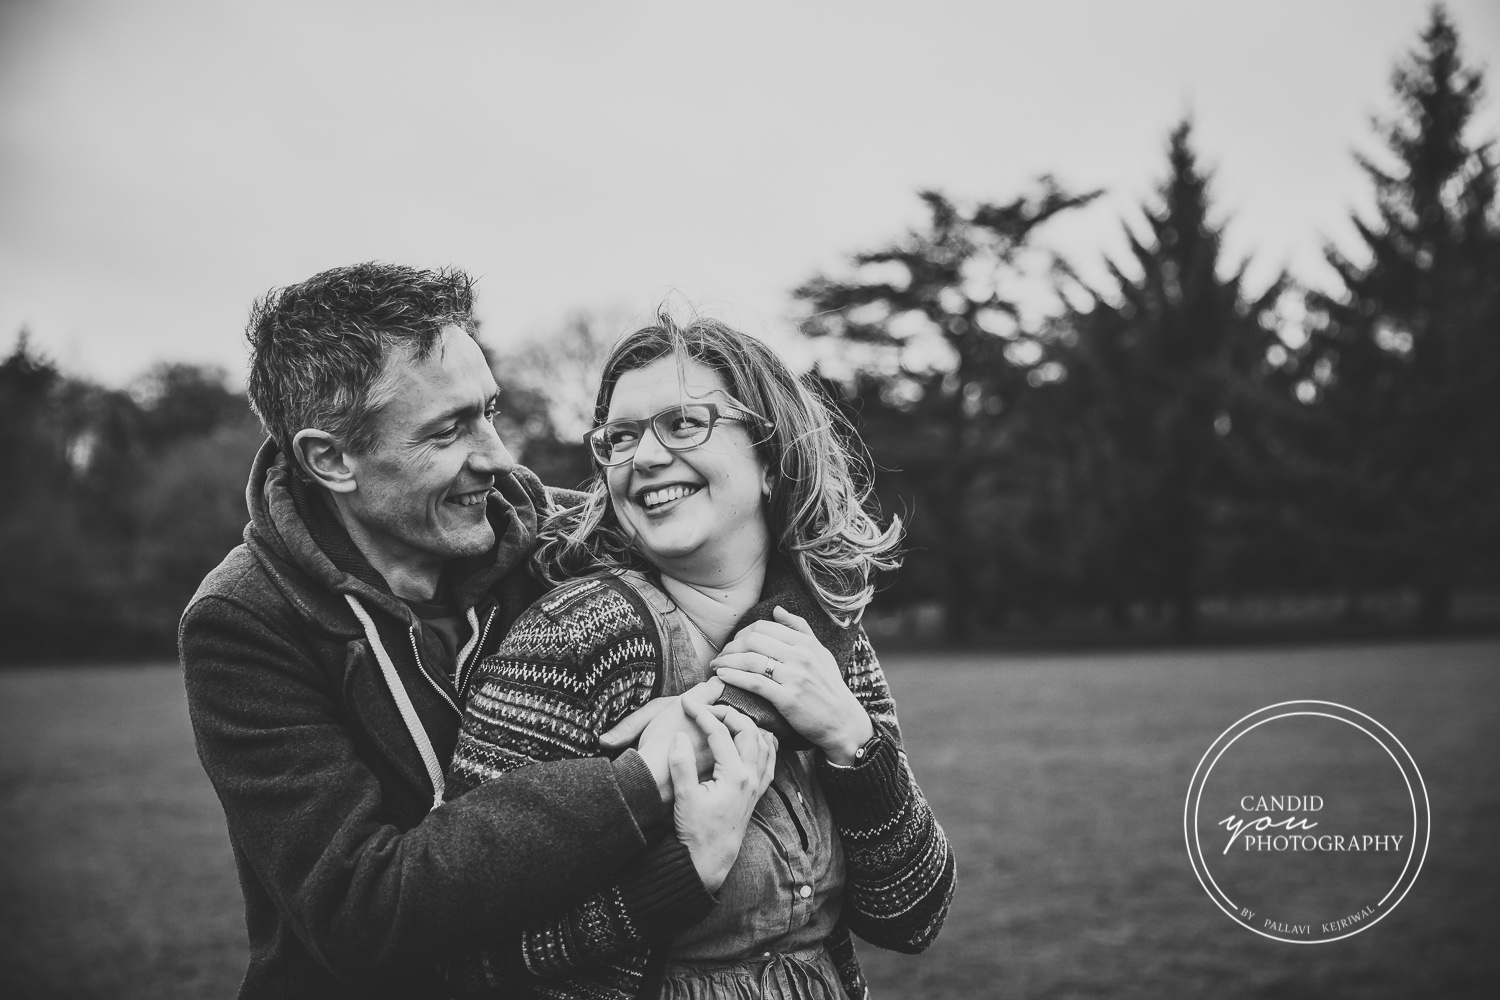 Harborne couple parents looks lovingly and romantically at each other